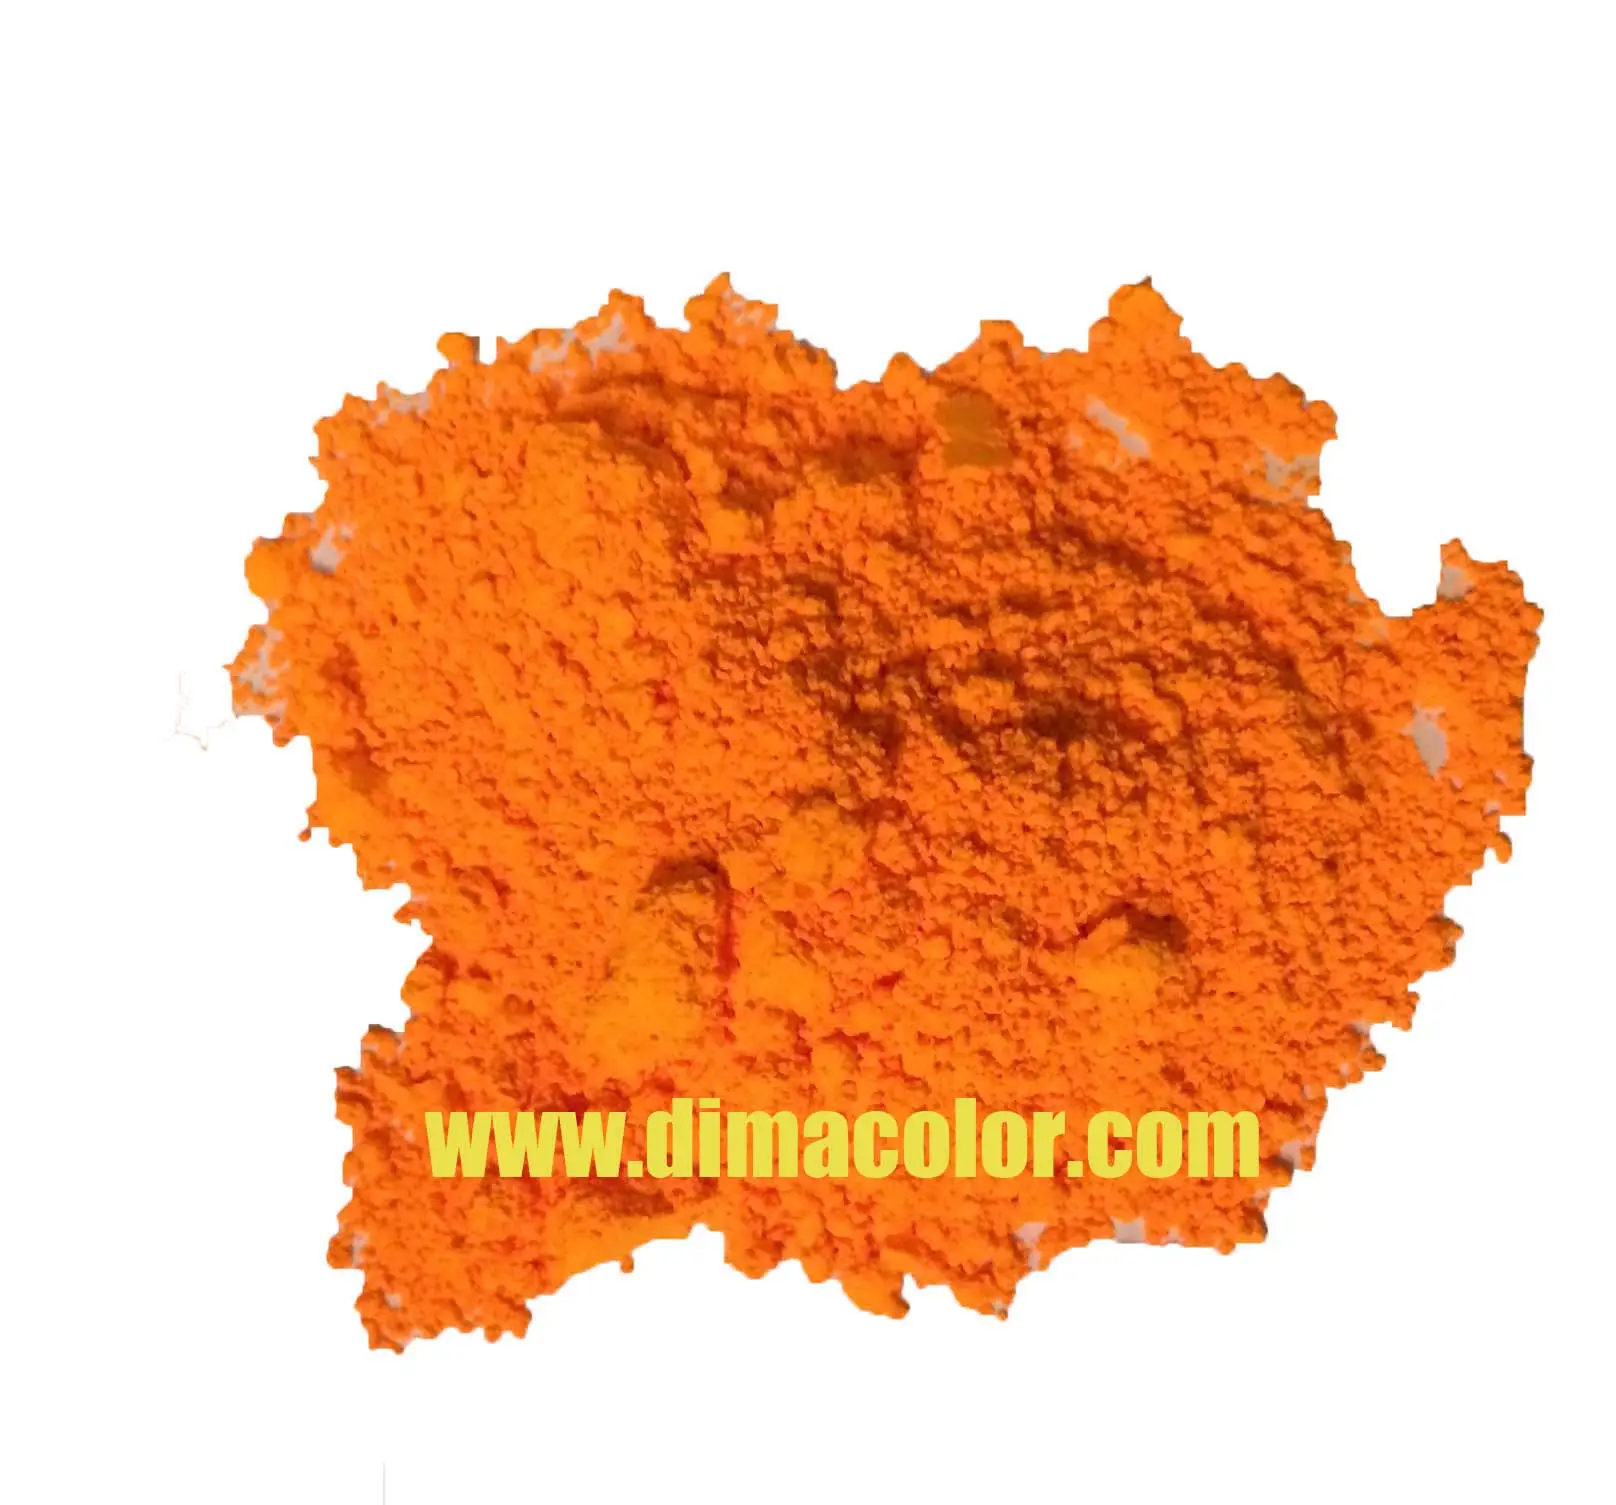 PIGMENT YELLOW FRN(PIGMENT YELLOW 170)POWDER PIGMENT LEAD FREE FOR ROAD MARKING PAINT